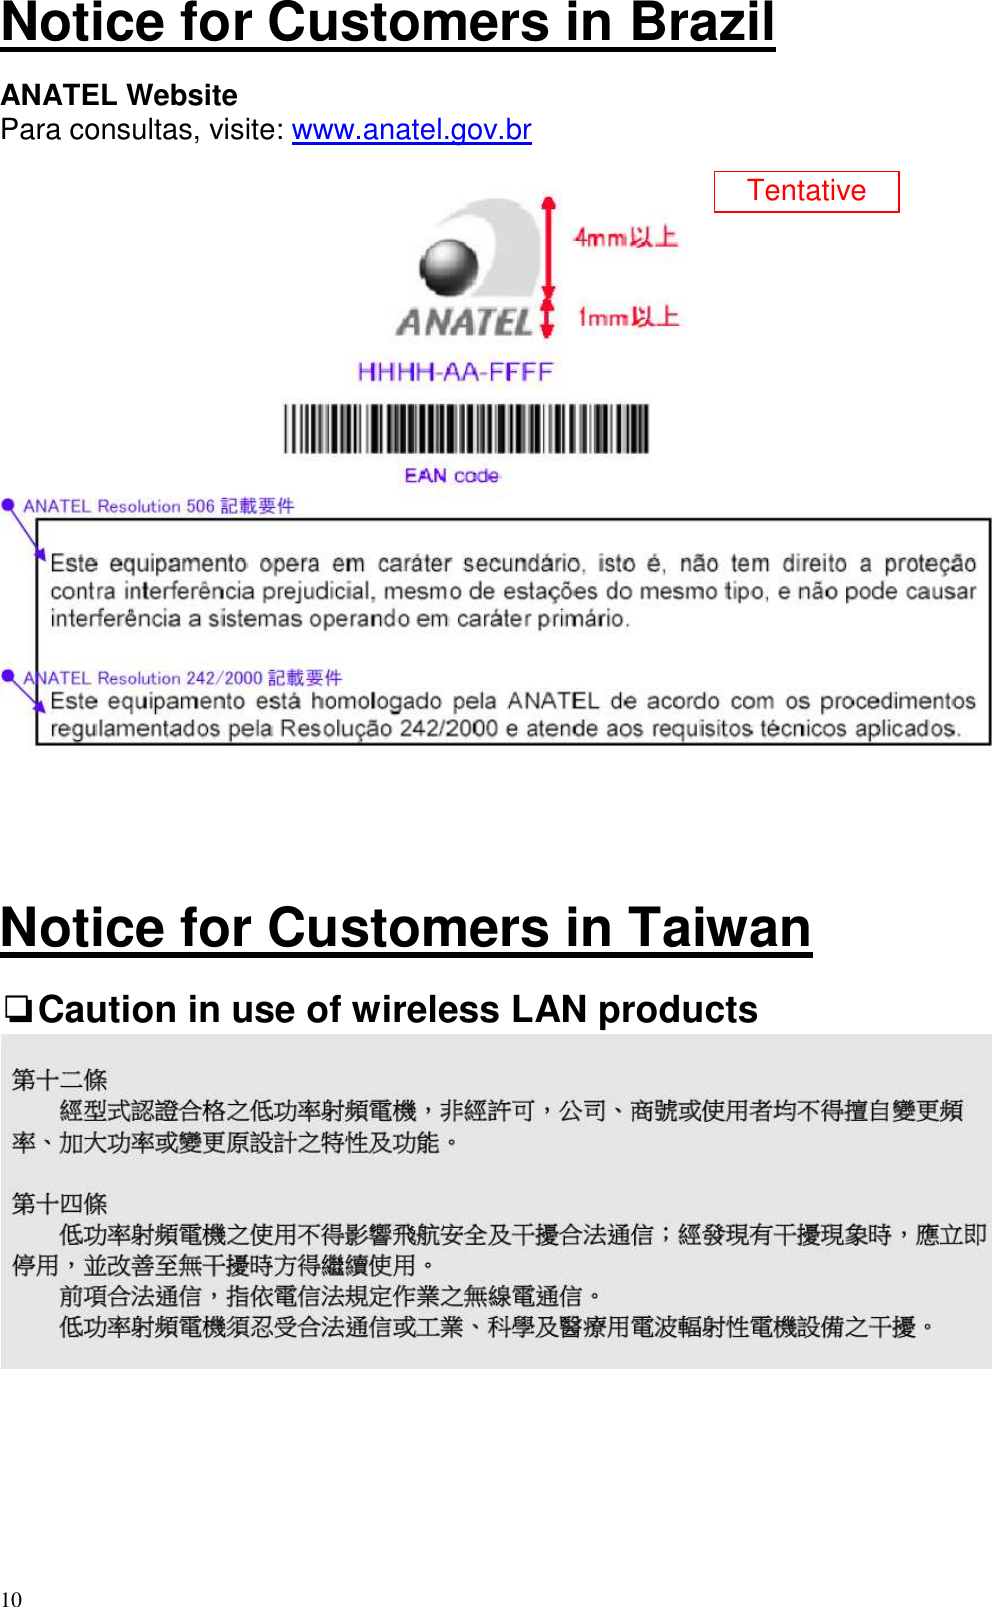   10 Notice for Customers in Brazil  ANATEL Website Para consultas, visite: www.anatel.gov.br        Notice for Customers in Taiwan  ❏Caution in use of wireless LAN products        Tentative 